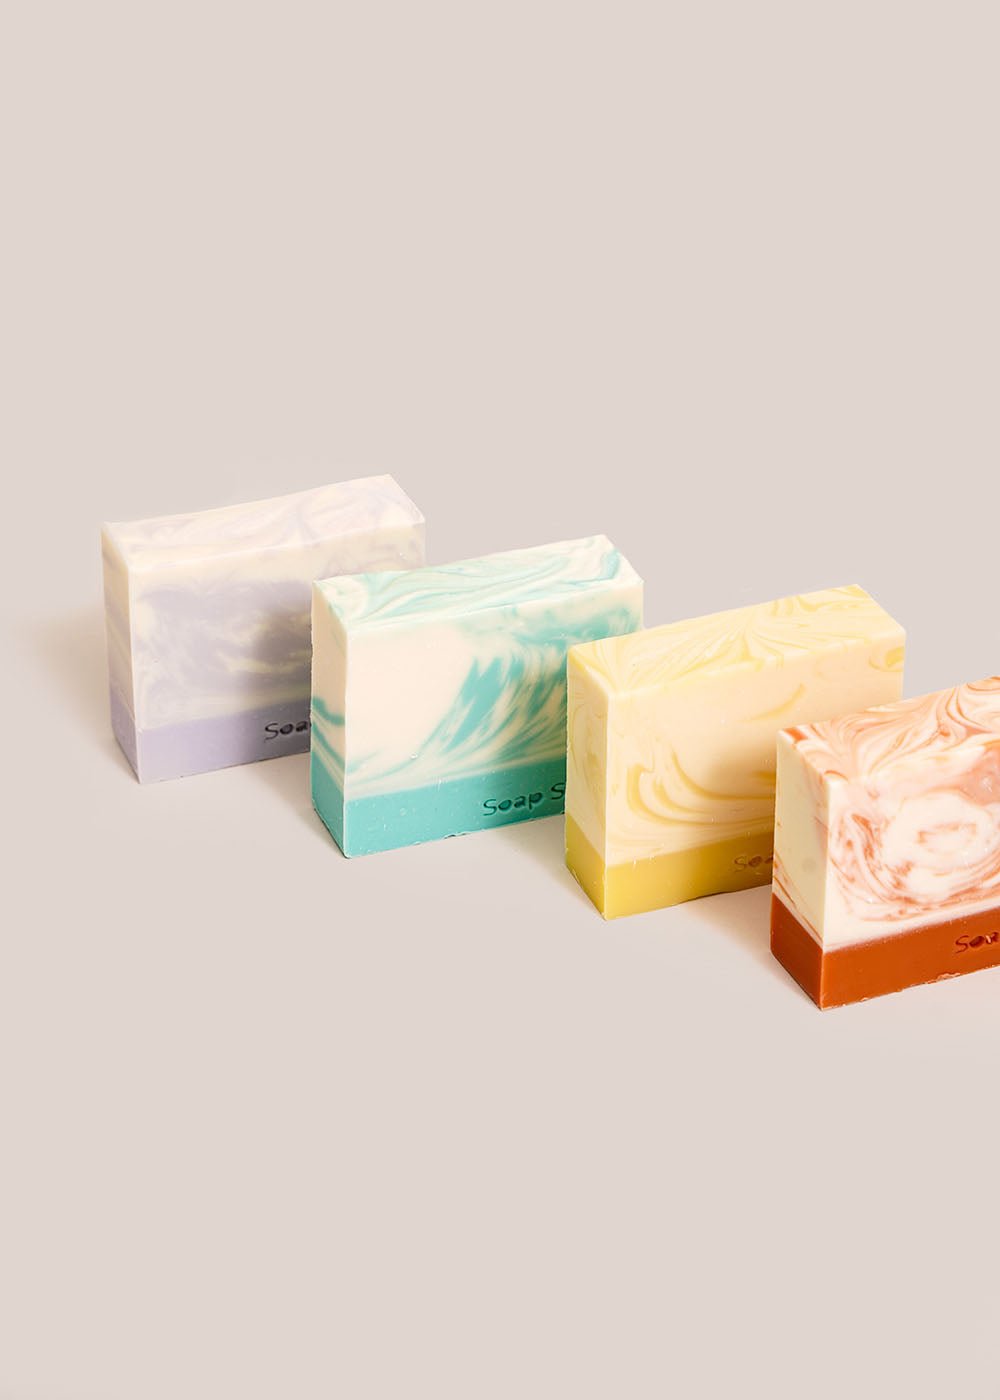 Soap So Co. Soap Dream Collection - New Classics Studios Sustainable Ethical Fashion Canada